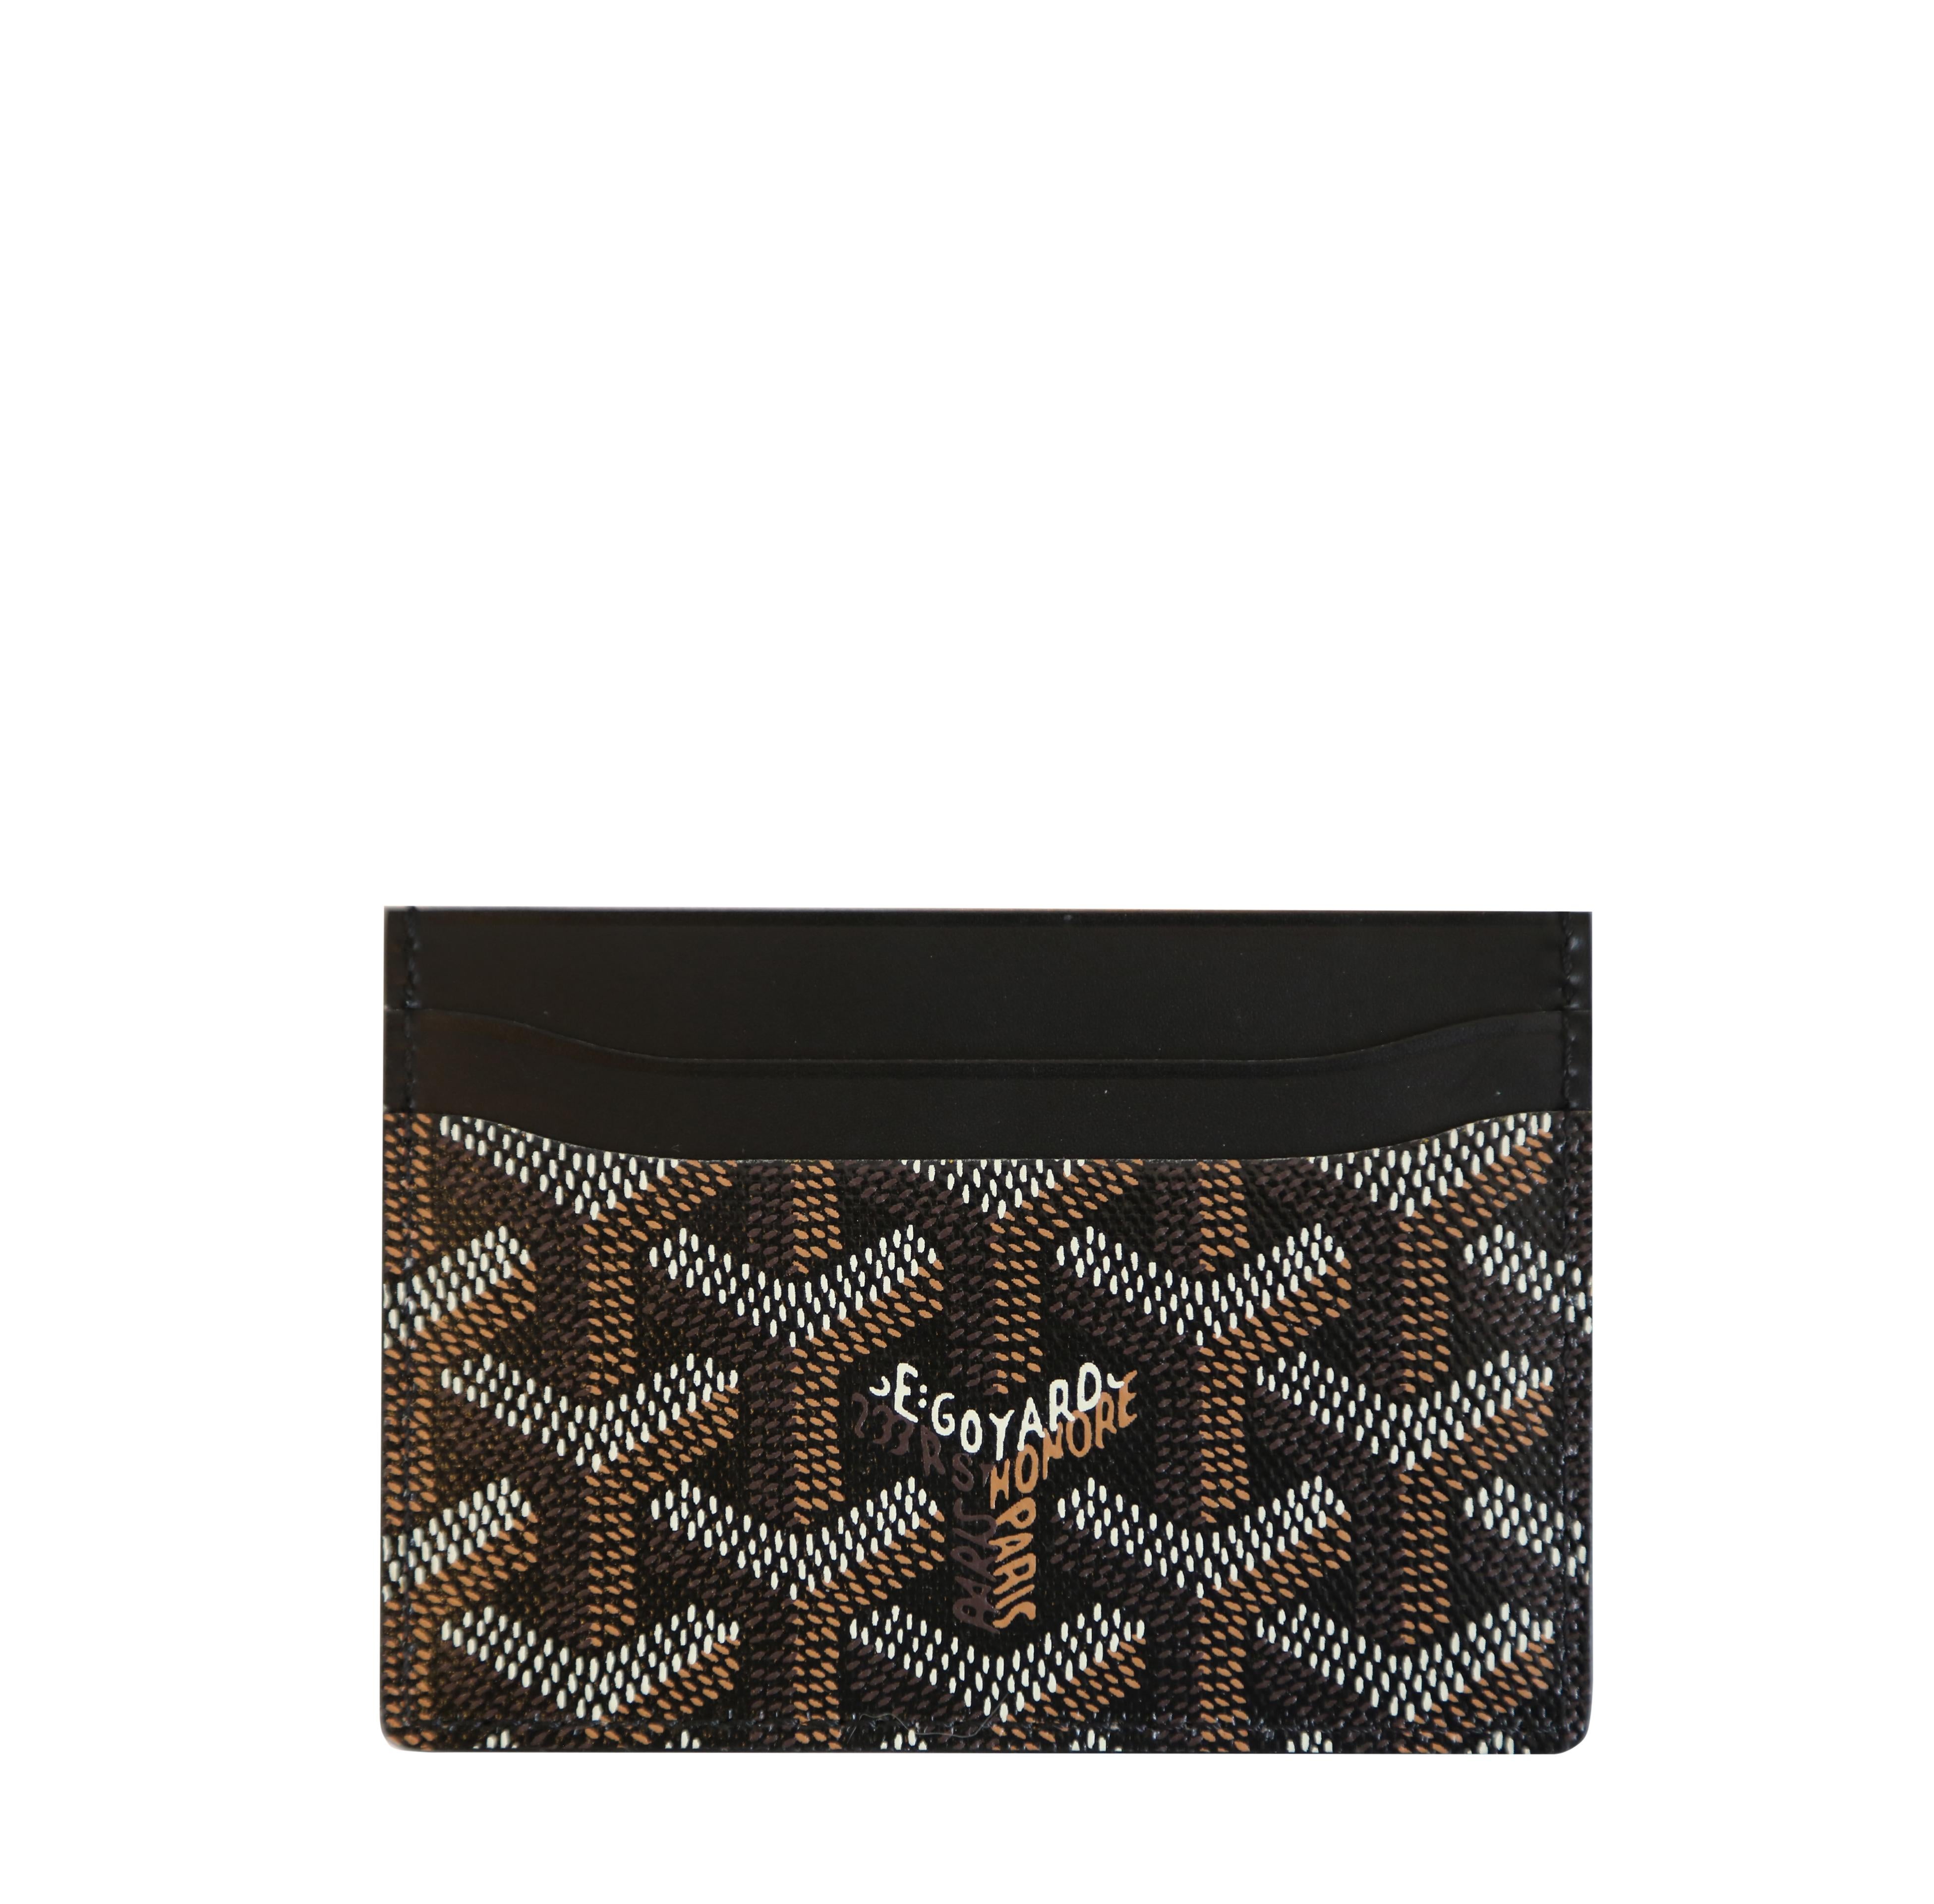 Goyard Customised Saint Sulpice Wallet  In New Condition For Sale In London, GB